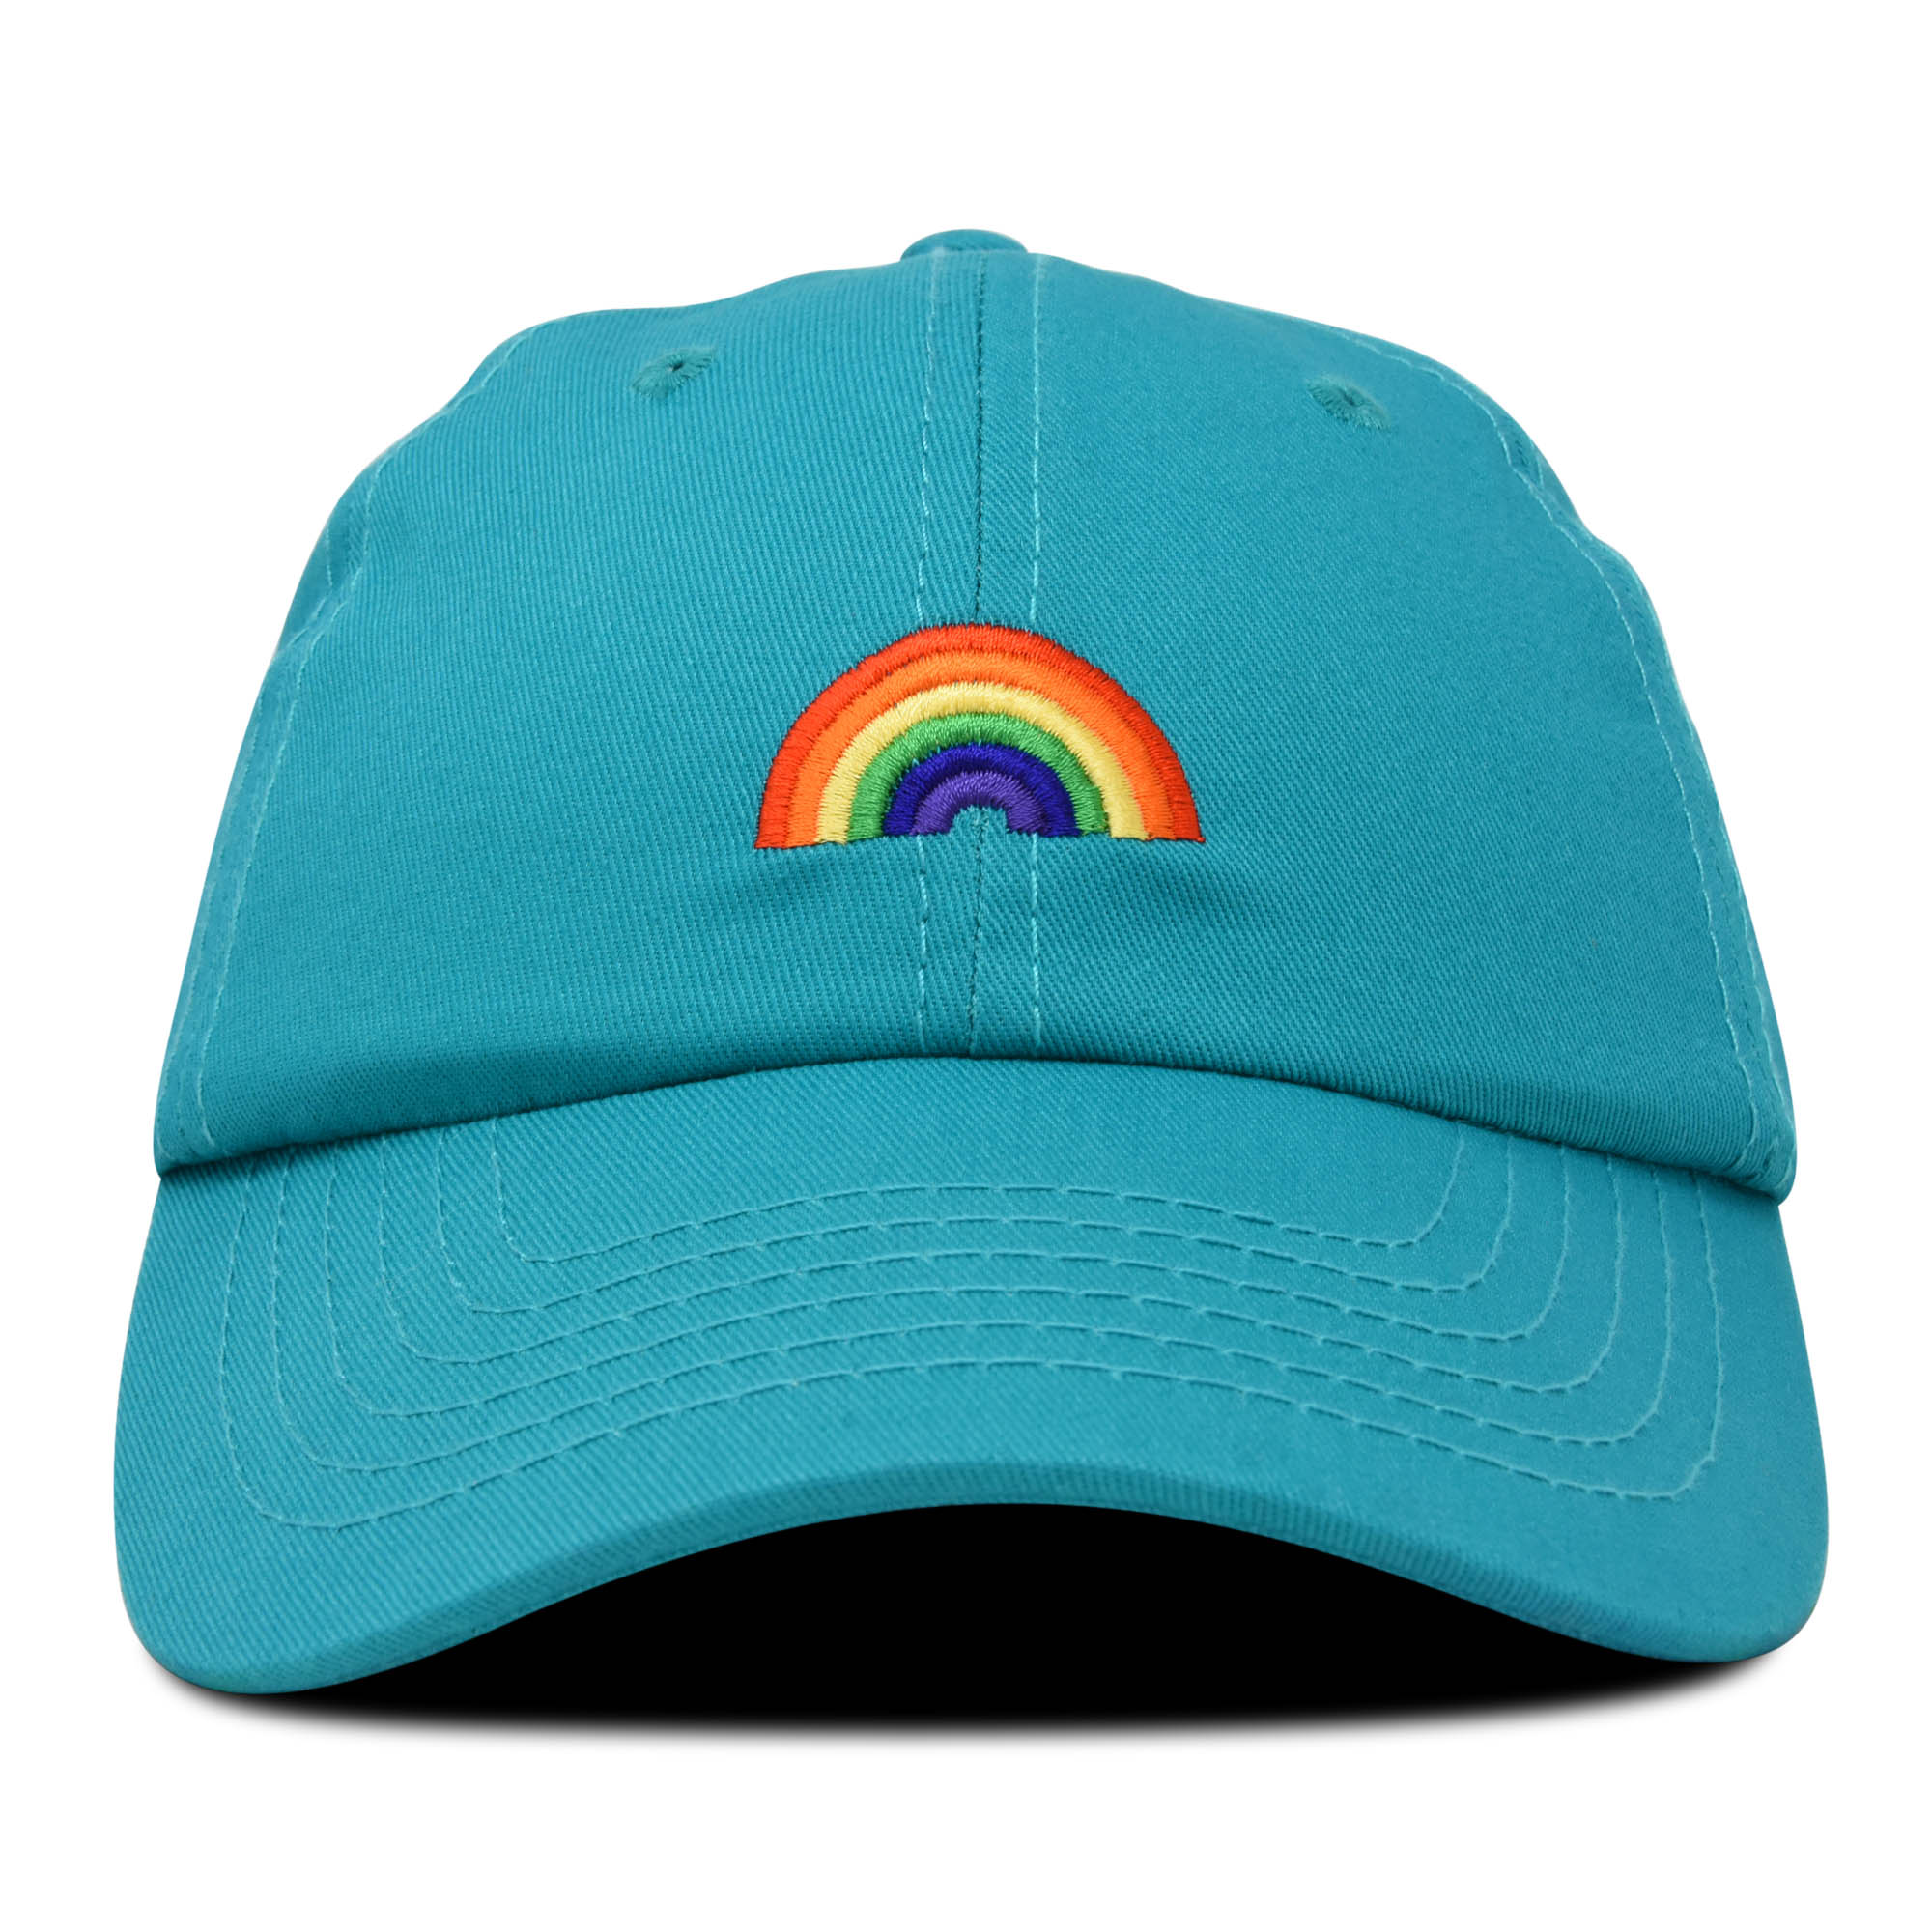 DALIX Rainbow Baseball Cap Womens Hats Cute Hat Soft Cotton Caps in Teal - image 4 of 7